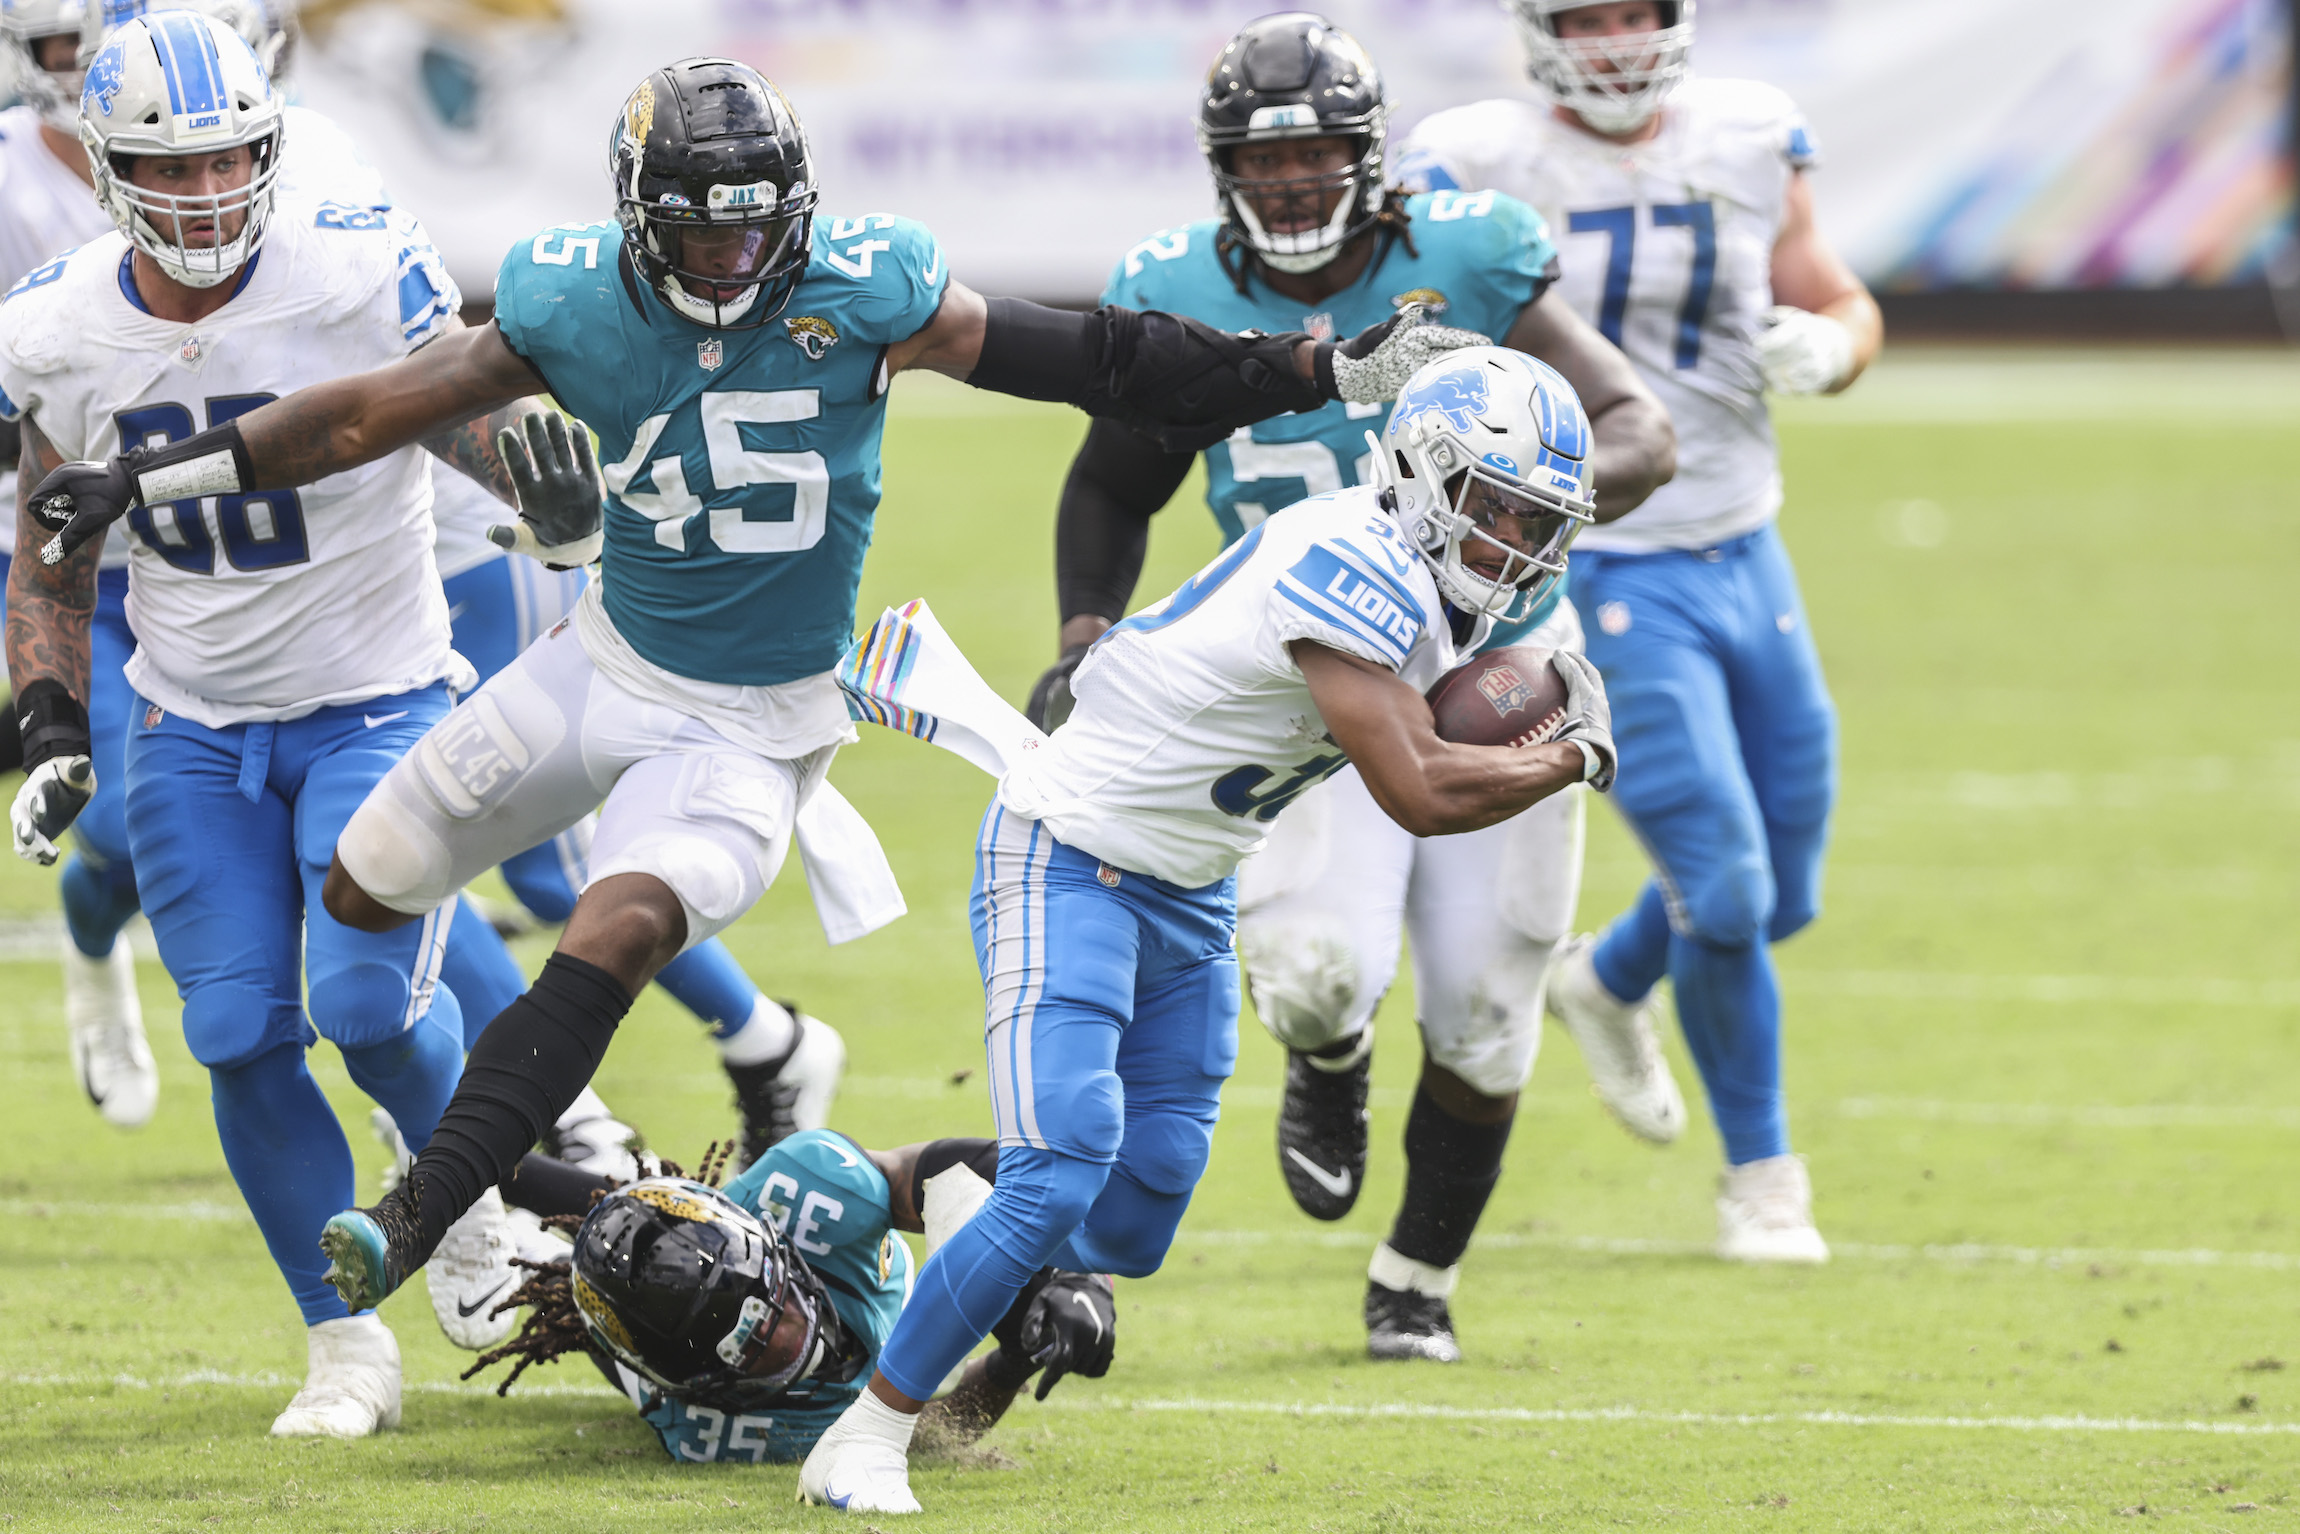 JACKSONVILLE, FLORIDA - OCTOBER 18: Jamal Agnew #39 of the Detroit Lions runs for yardage against Sidney Jones #35 and K'Lavon Chaisson #45 of the Jacksonville Jaguars during the first half of a game at TIAA Bank Field on October 18, 2020 in Jacksonville, Florida. (Photo by James Gilbert/Getty Images)